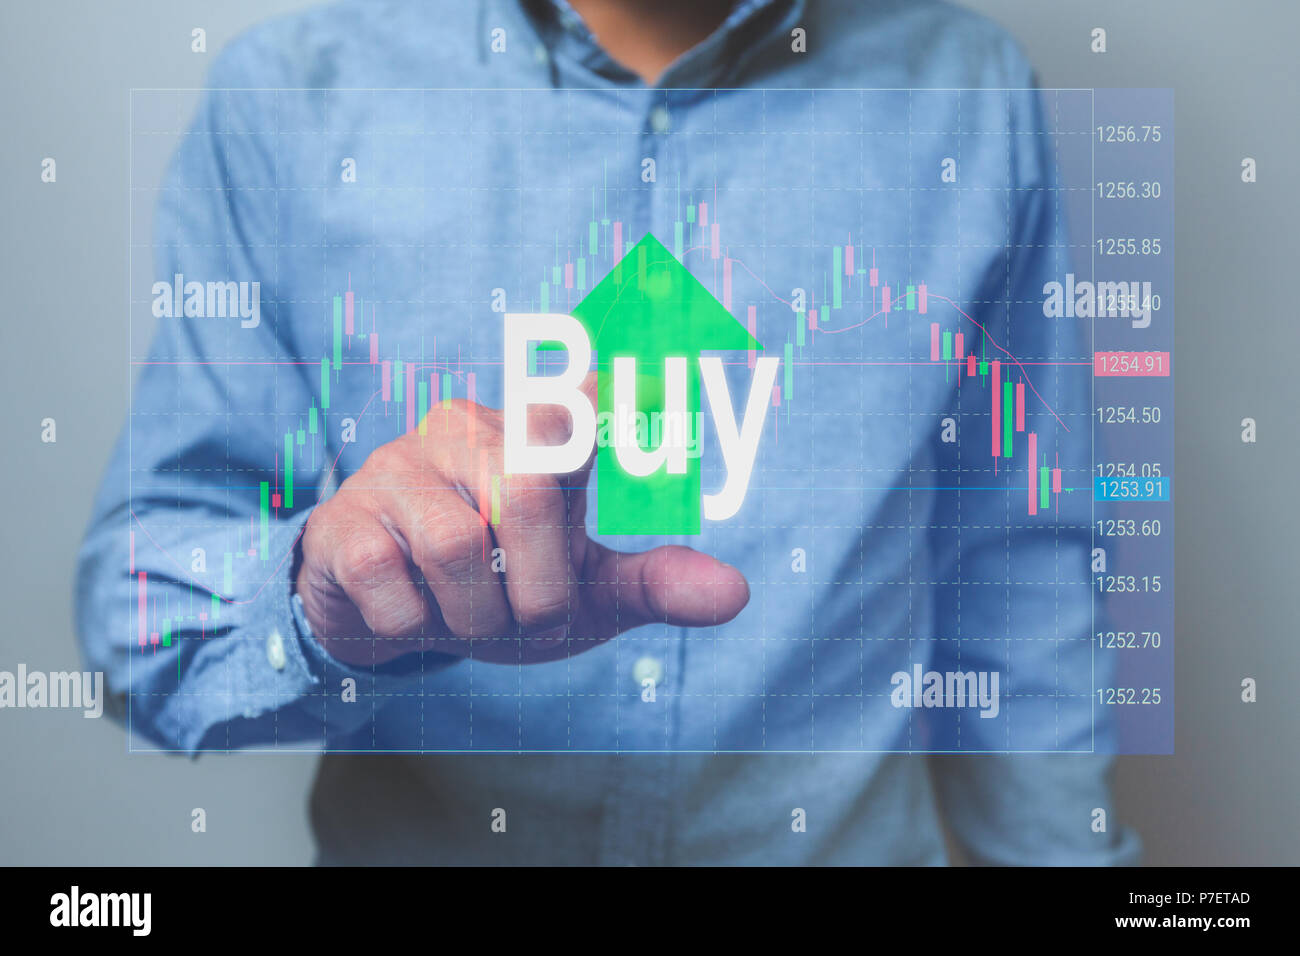 Businessman view on the hologram screen, he will press the buy button stock market. Stock Photo